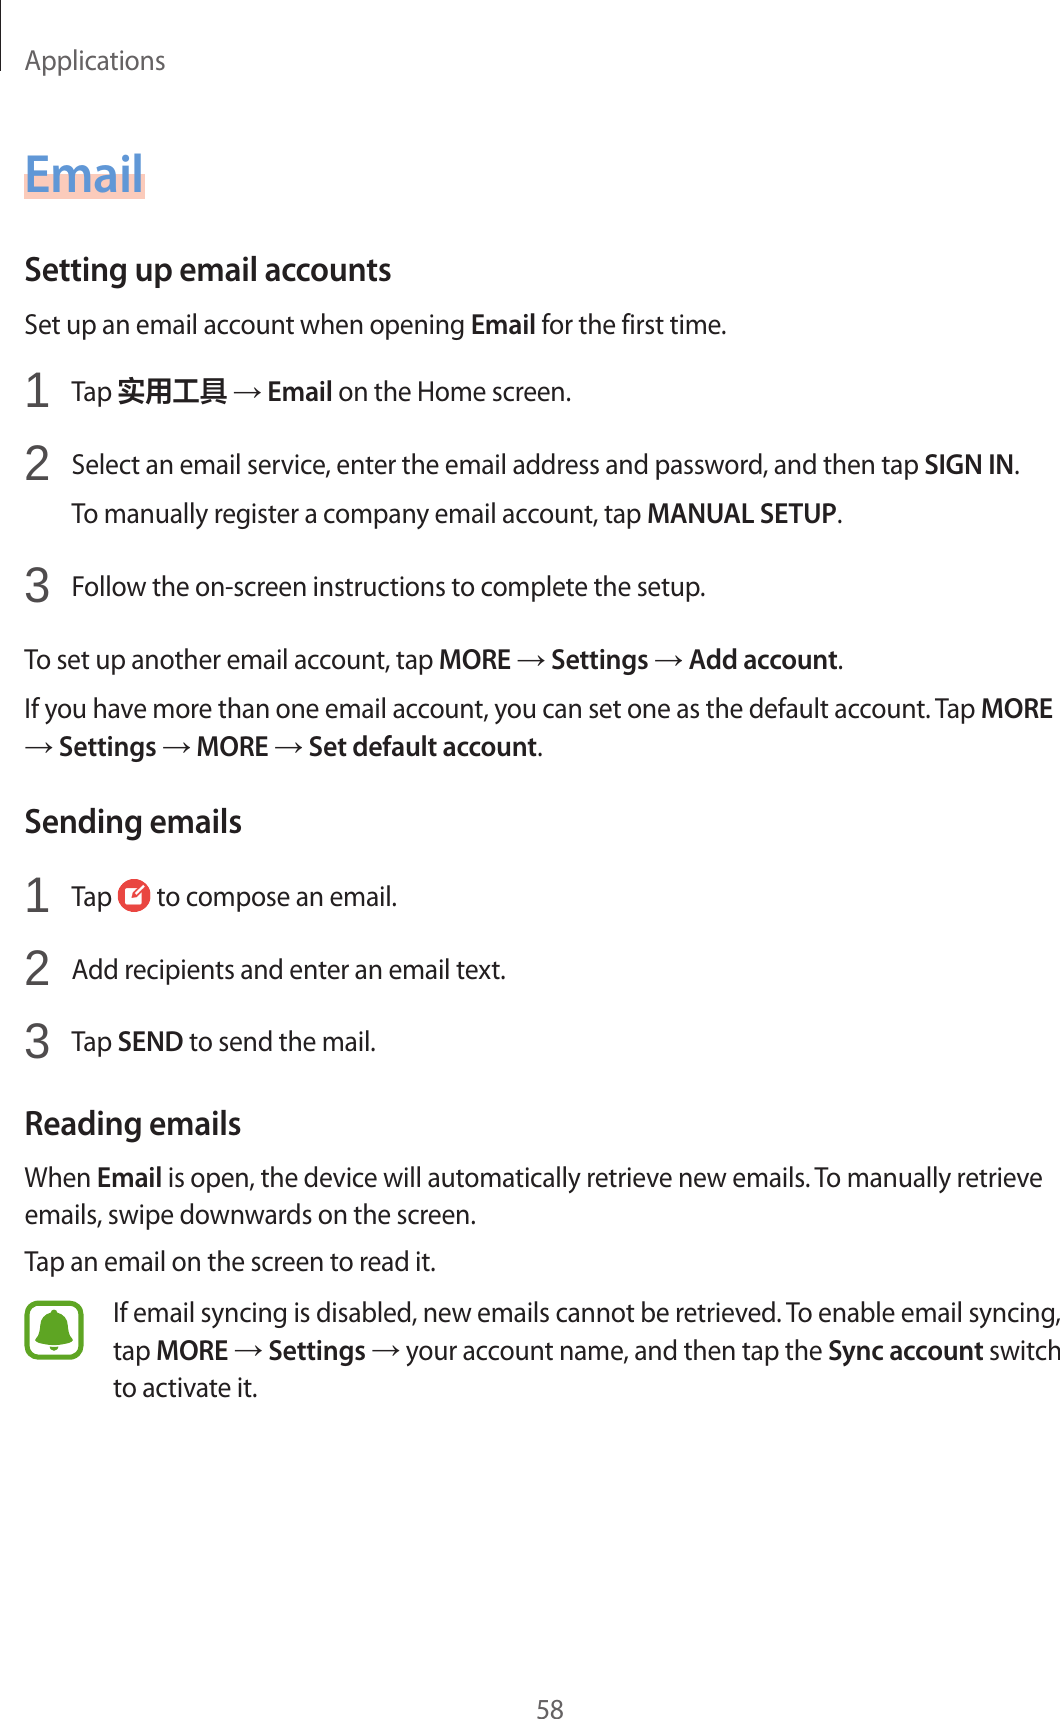 Applications58EmailSetting up email accountsSet up an email account when opening Email for the first time.1  Tap 实用工具 → Email on the Home screen.2  Select an email service, enter the email address and password, and then tap SIGN IN.To manually register a company email account, tap MANUAL SETUP.3  Follow the on-screen instructions to complete the setup.To set up another email account, tap MORE → Settings → Add account.If you have more than one email account, you can set one as the default account. Tap MORE → Settings → MORE → Set default account.Sending emails1  Tap   to compose an email.2  Add recipients and enter an email text.3  Tap SEND to send the mail.Reading emailsWhen Email is open, the device will automatically retrieve new emails. To manually retrieve emails, swipe downwards on the screen.Tap an email on the screen to read it.If email syncing is disabled, new emails cannot be retrieved. To enable email syncing, tap MORE → Settings → your account name, and then tap the Sync account switch to activate it.